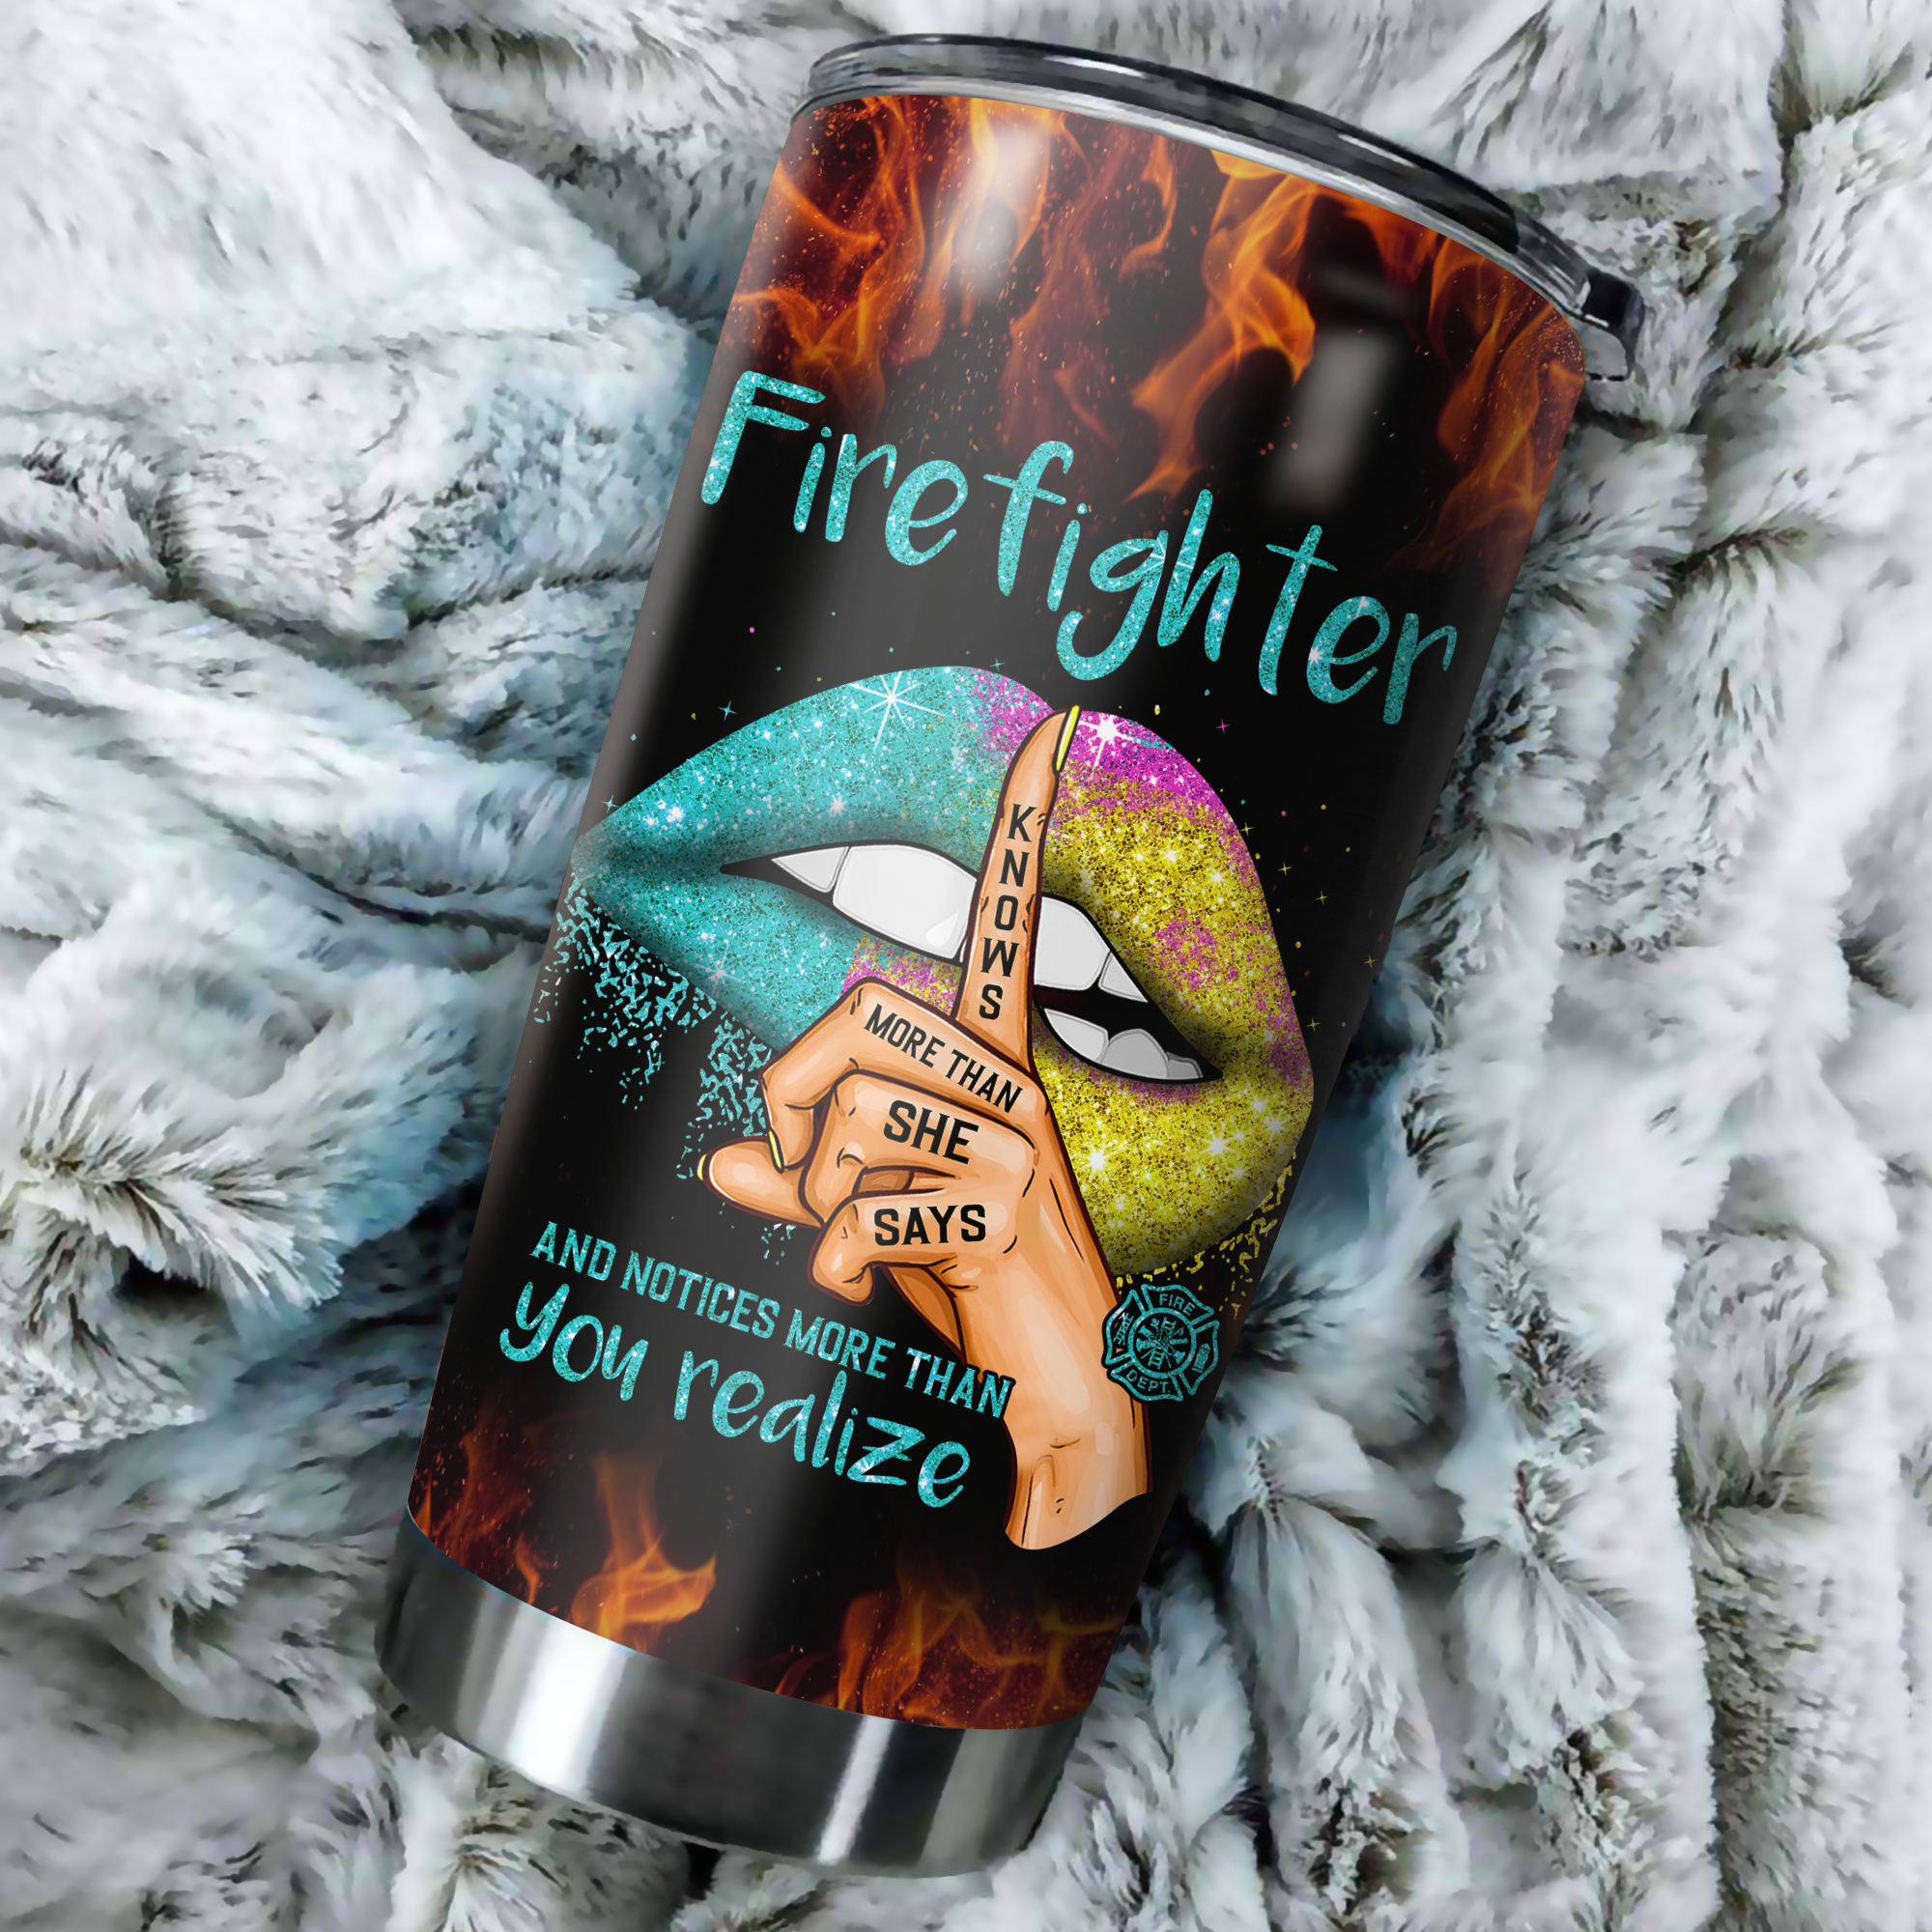 Firefighter Tumbler Knows More Than She Says Special Gift For Wife Mom Friend Girl Friend